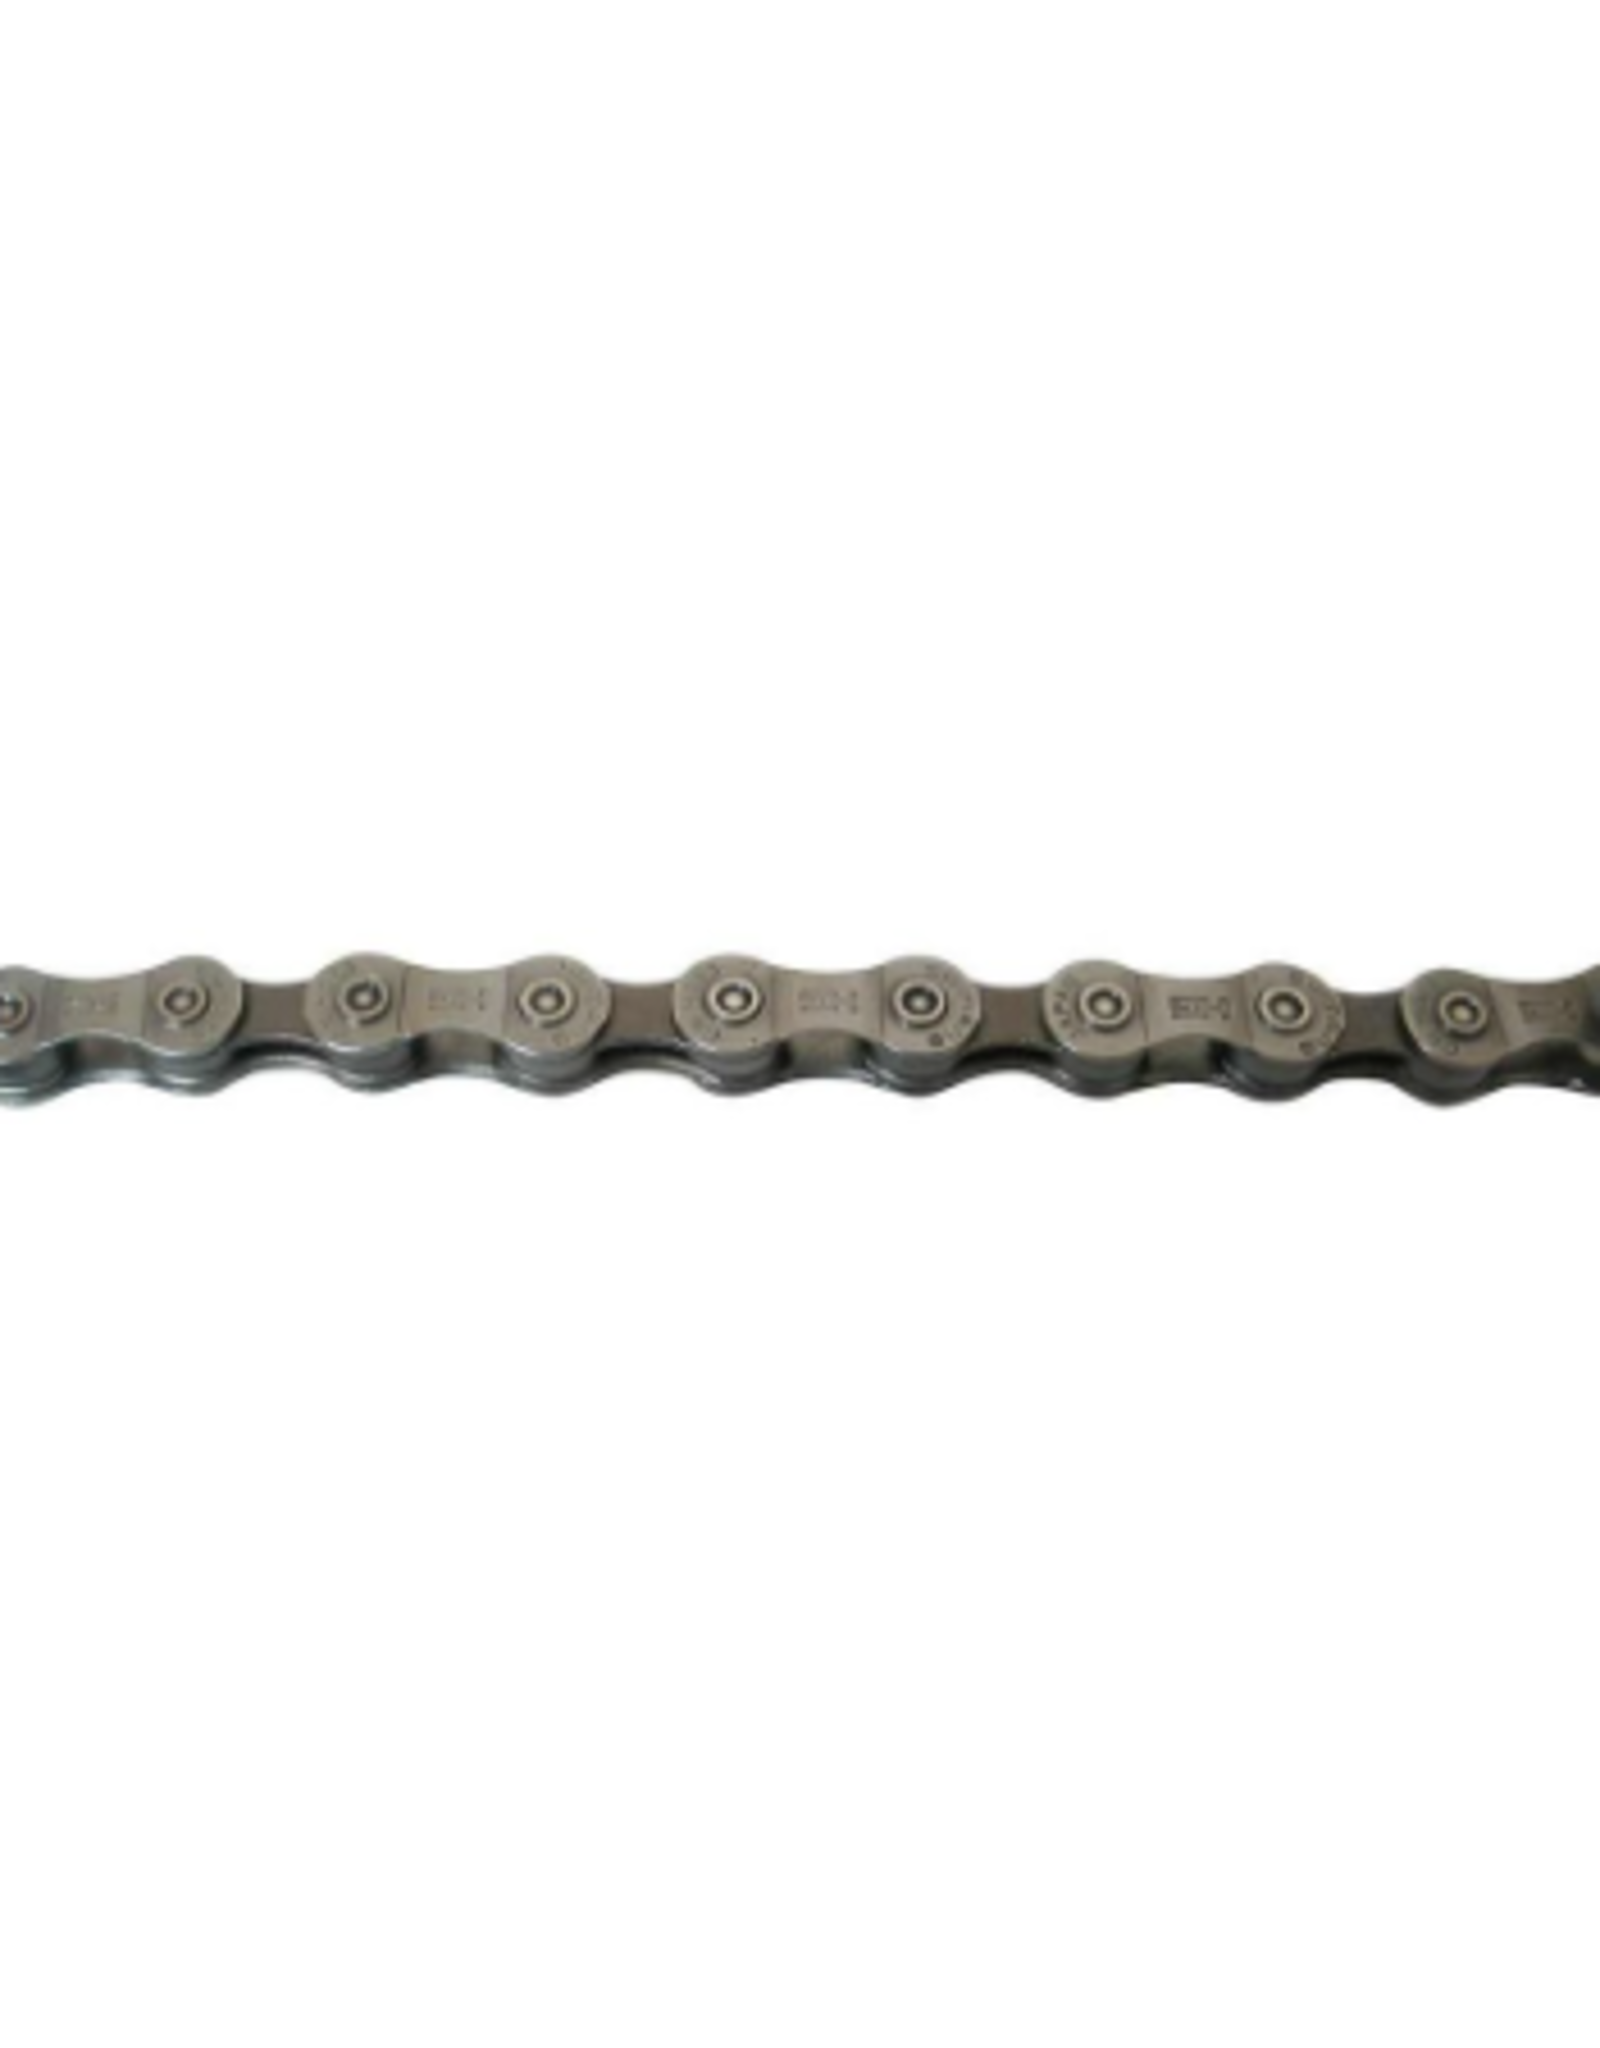 Shimano SHIMANO BICYCLE CHAIN CN-HG53,116 LINK W/AMPOULE END PIN X 1